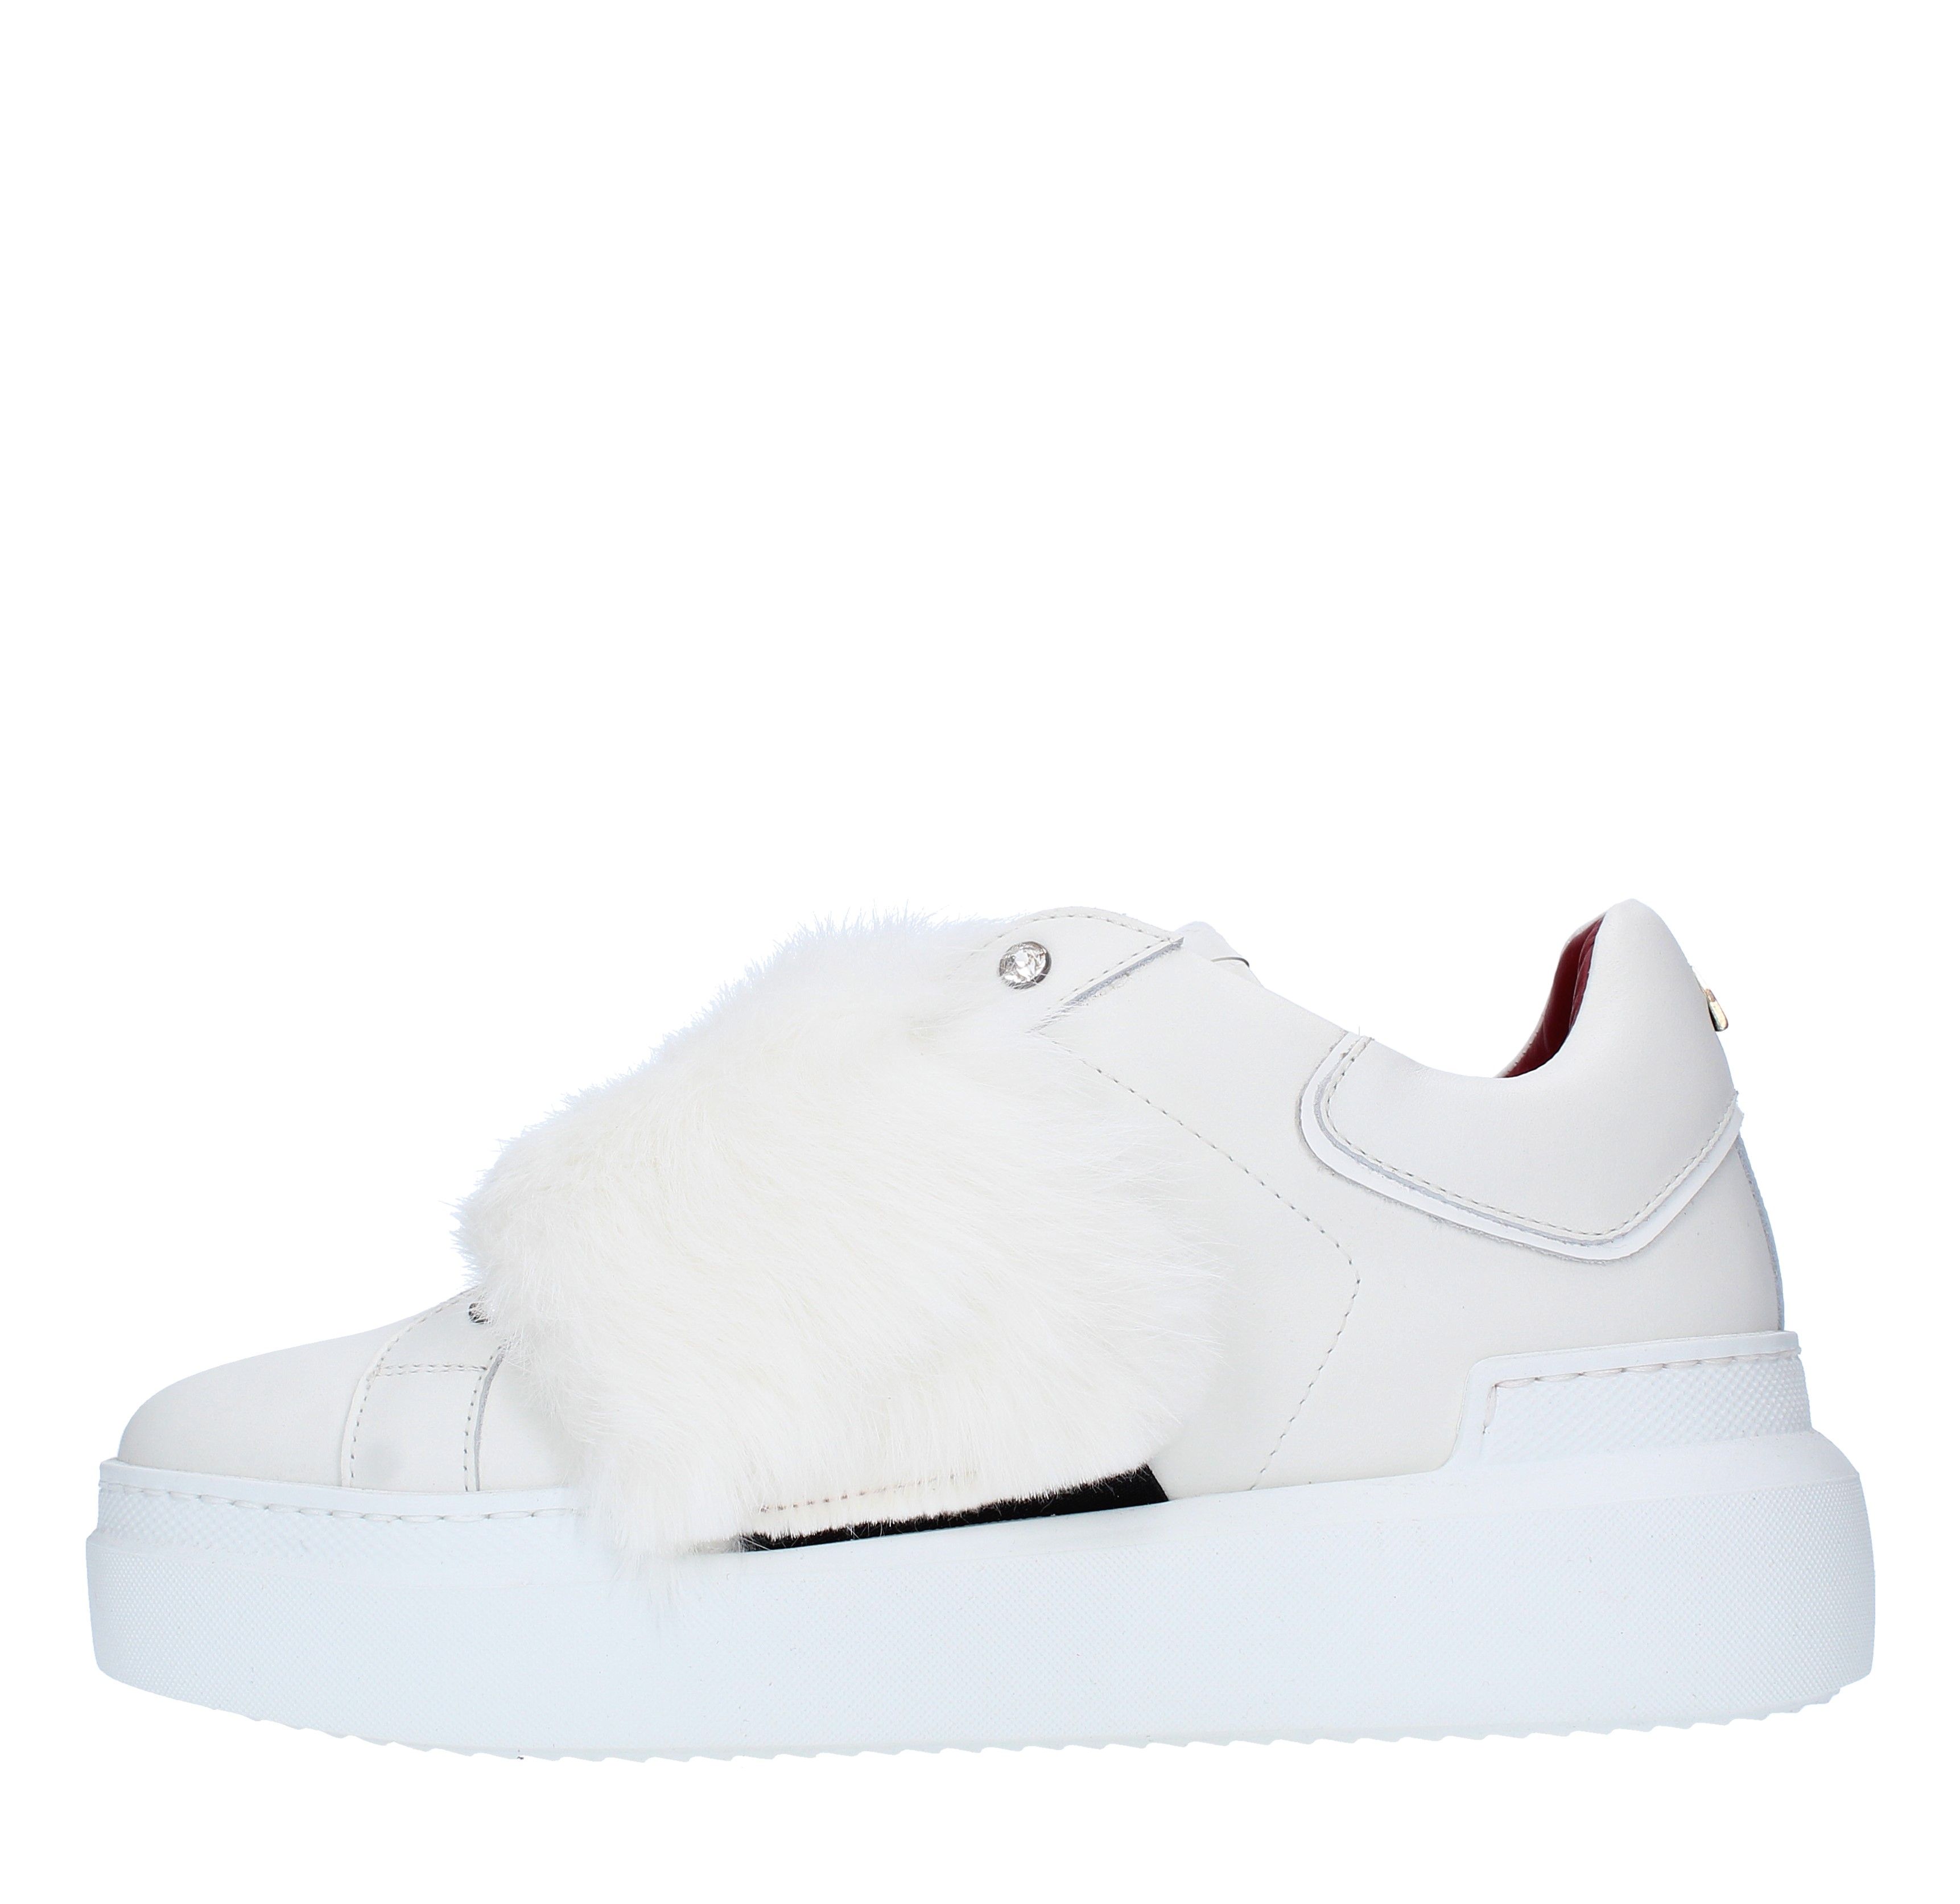 Leather and fur sneakers. ED PARRISH | FA41BIANCO